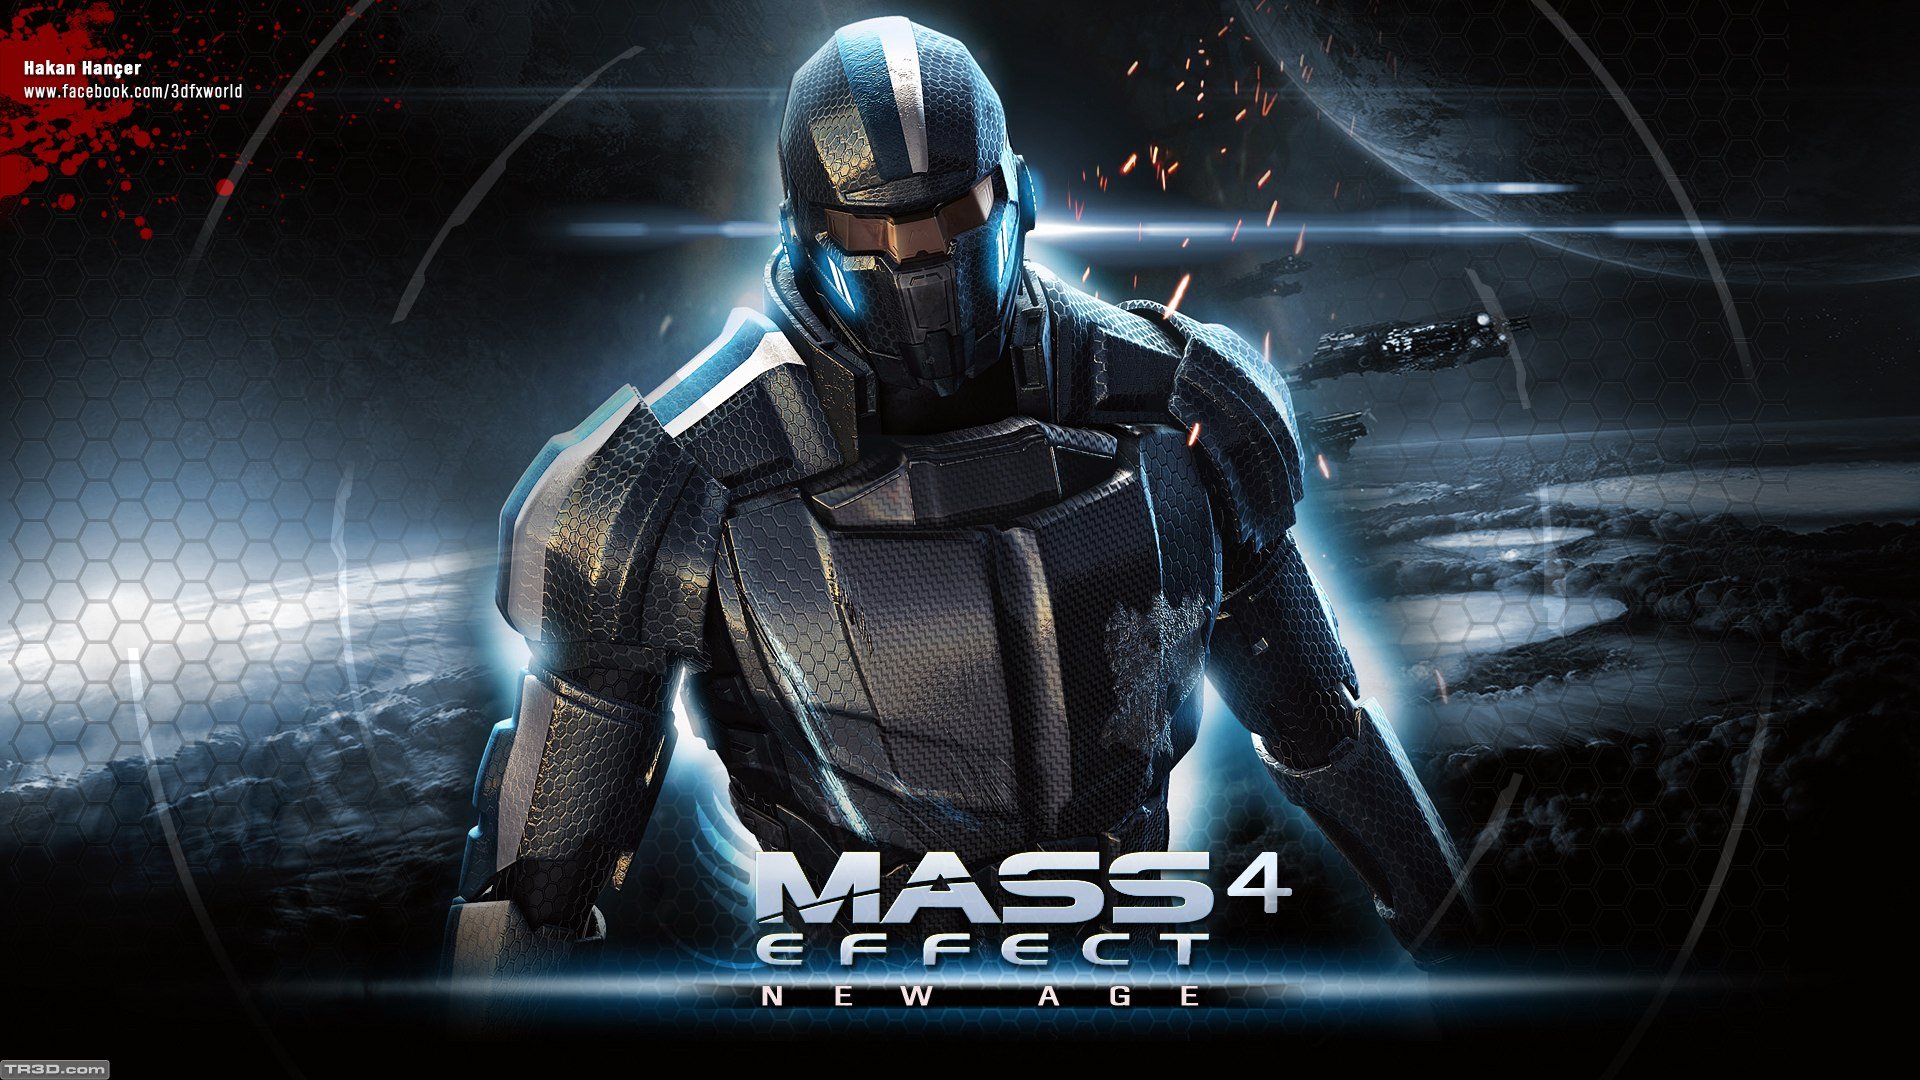 mass, Effect, 4, Andromeda, Sci fi, Shooter, Action, Futuristic, Warrior, Armor, Mmo, Online, Poster Wallpaper